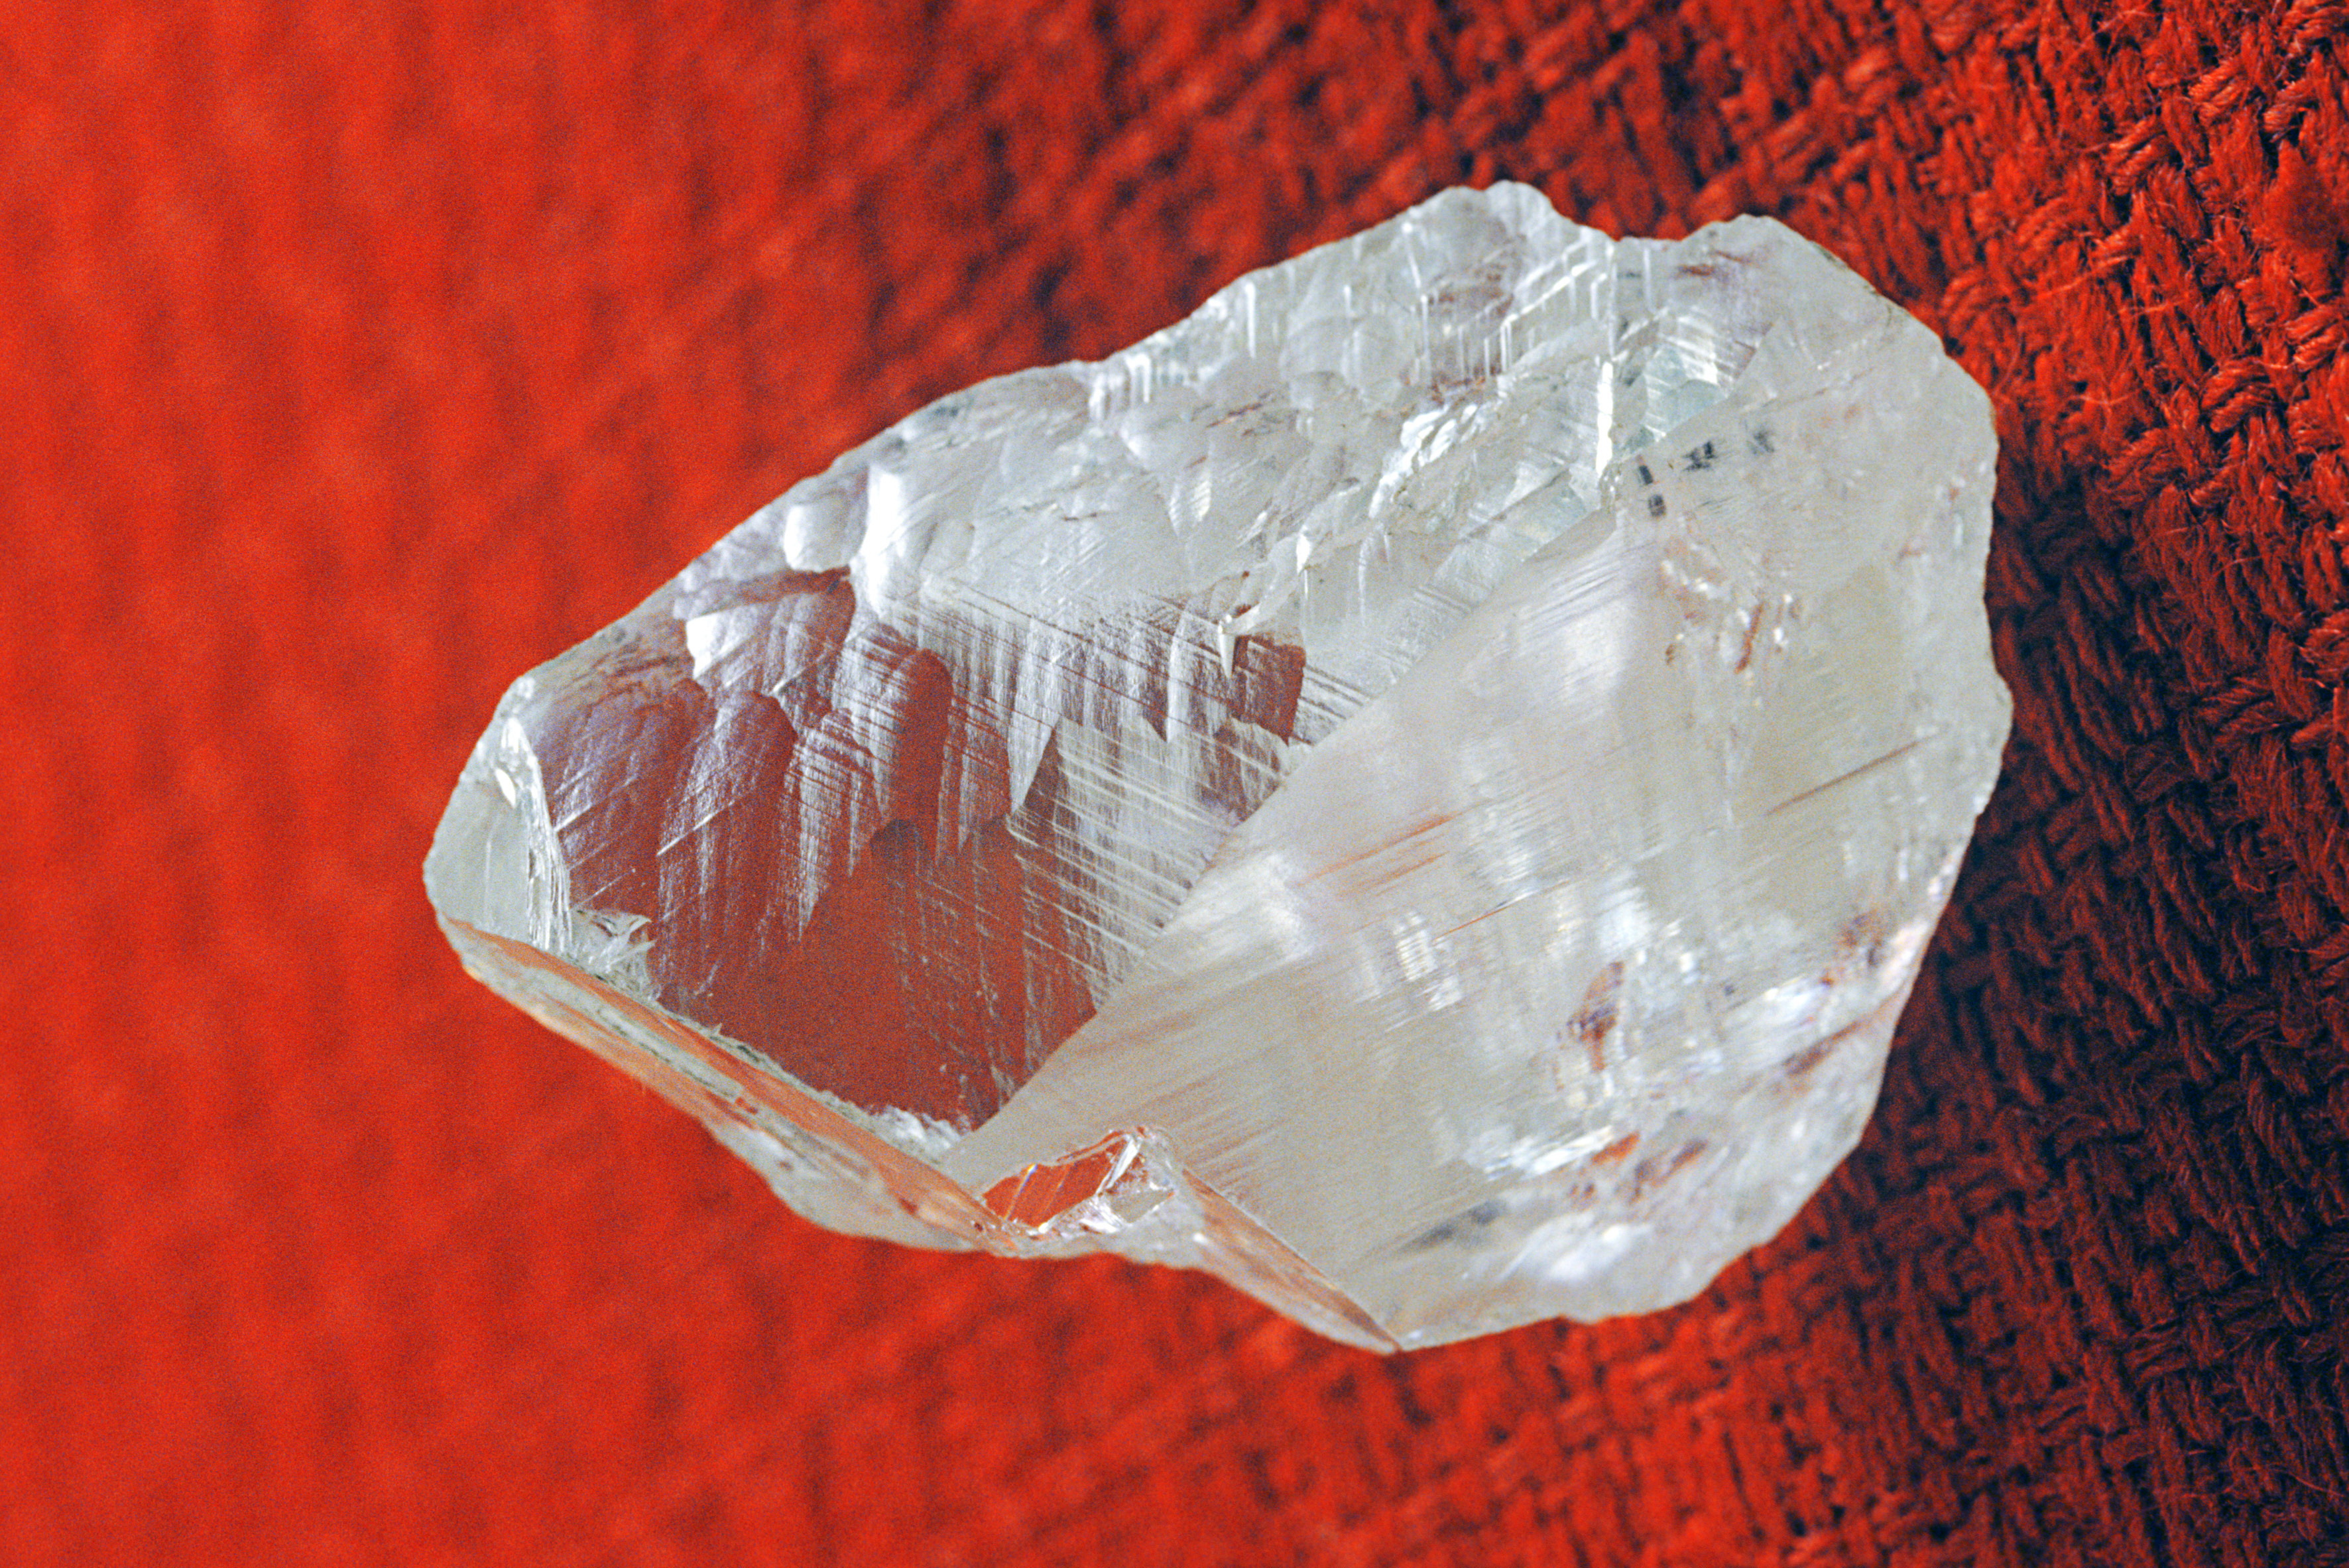 Free Russia. 241.88 carats, 1991. Workers in Yakutia presented it to the first Russian President, Boris Yeltsin.